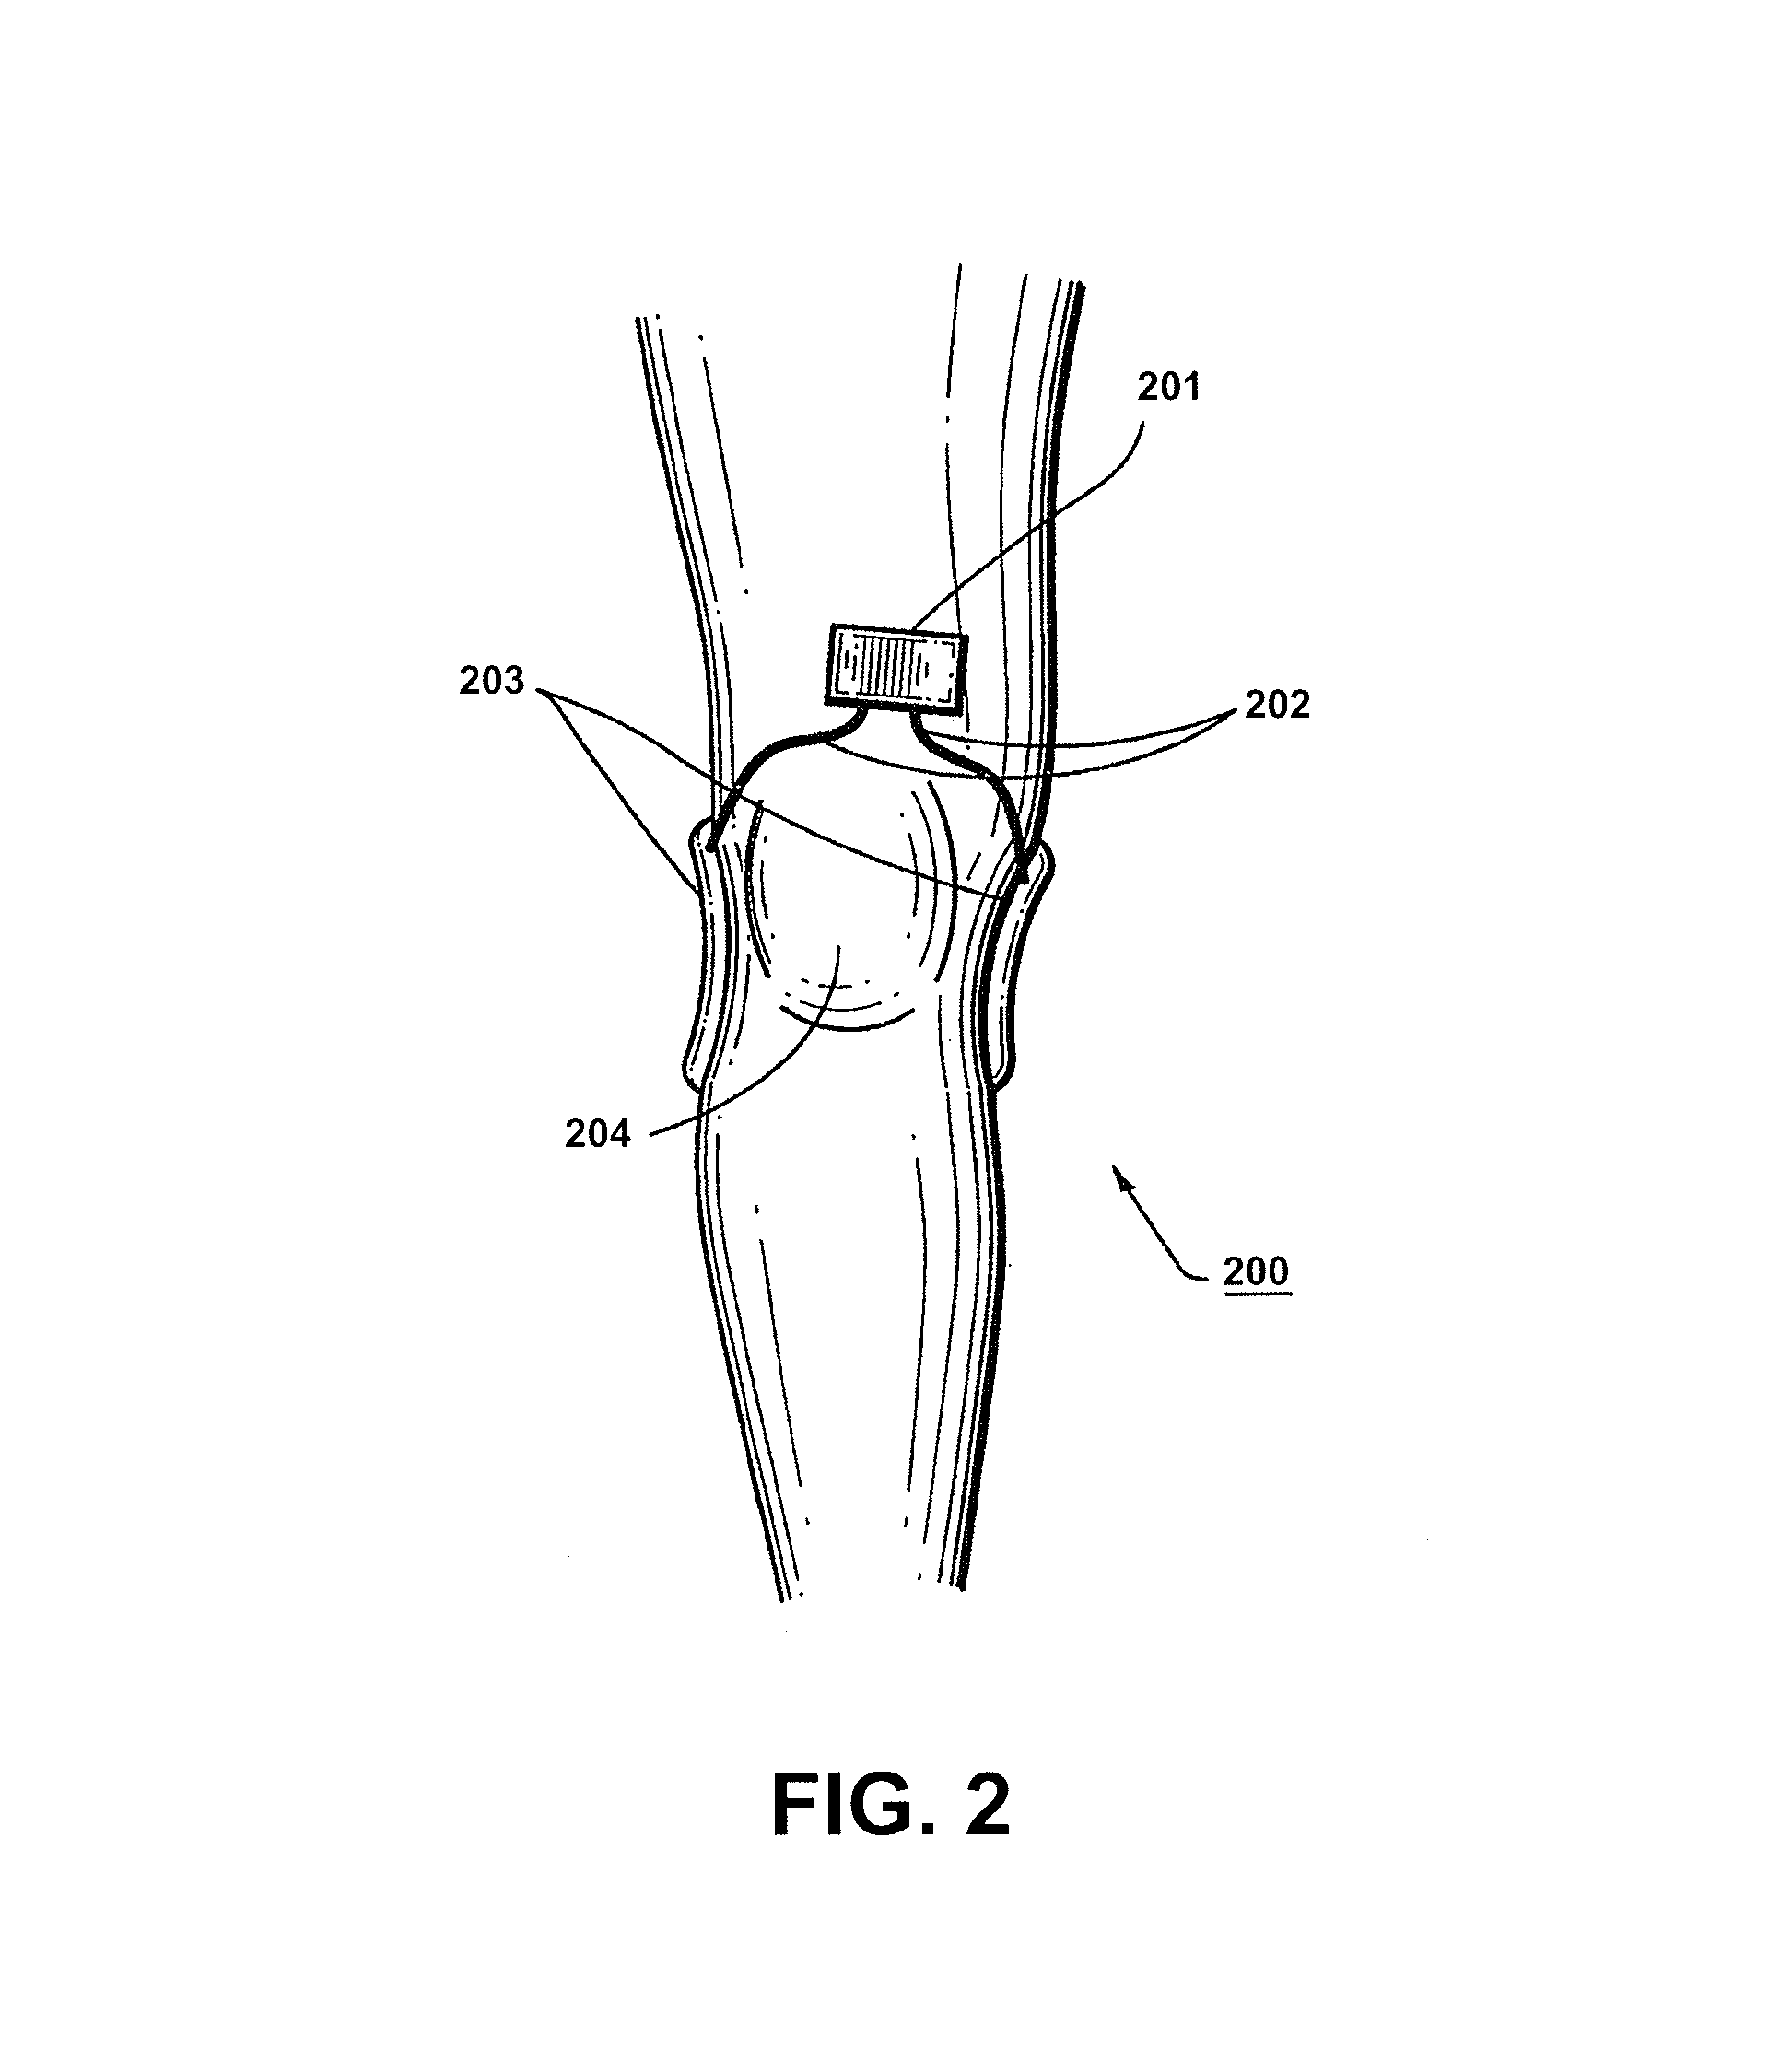 Apparatus and method for electromagnetic treatment of neurodegenerative conditions